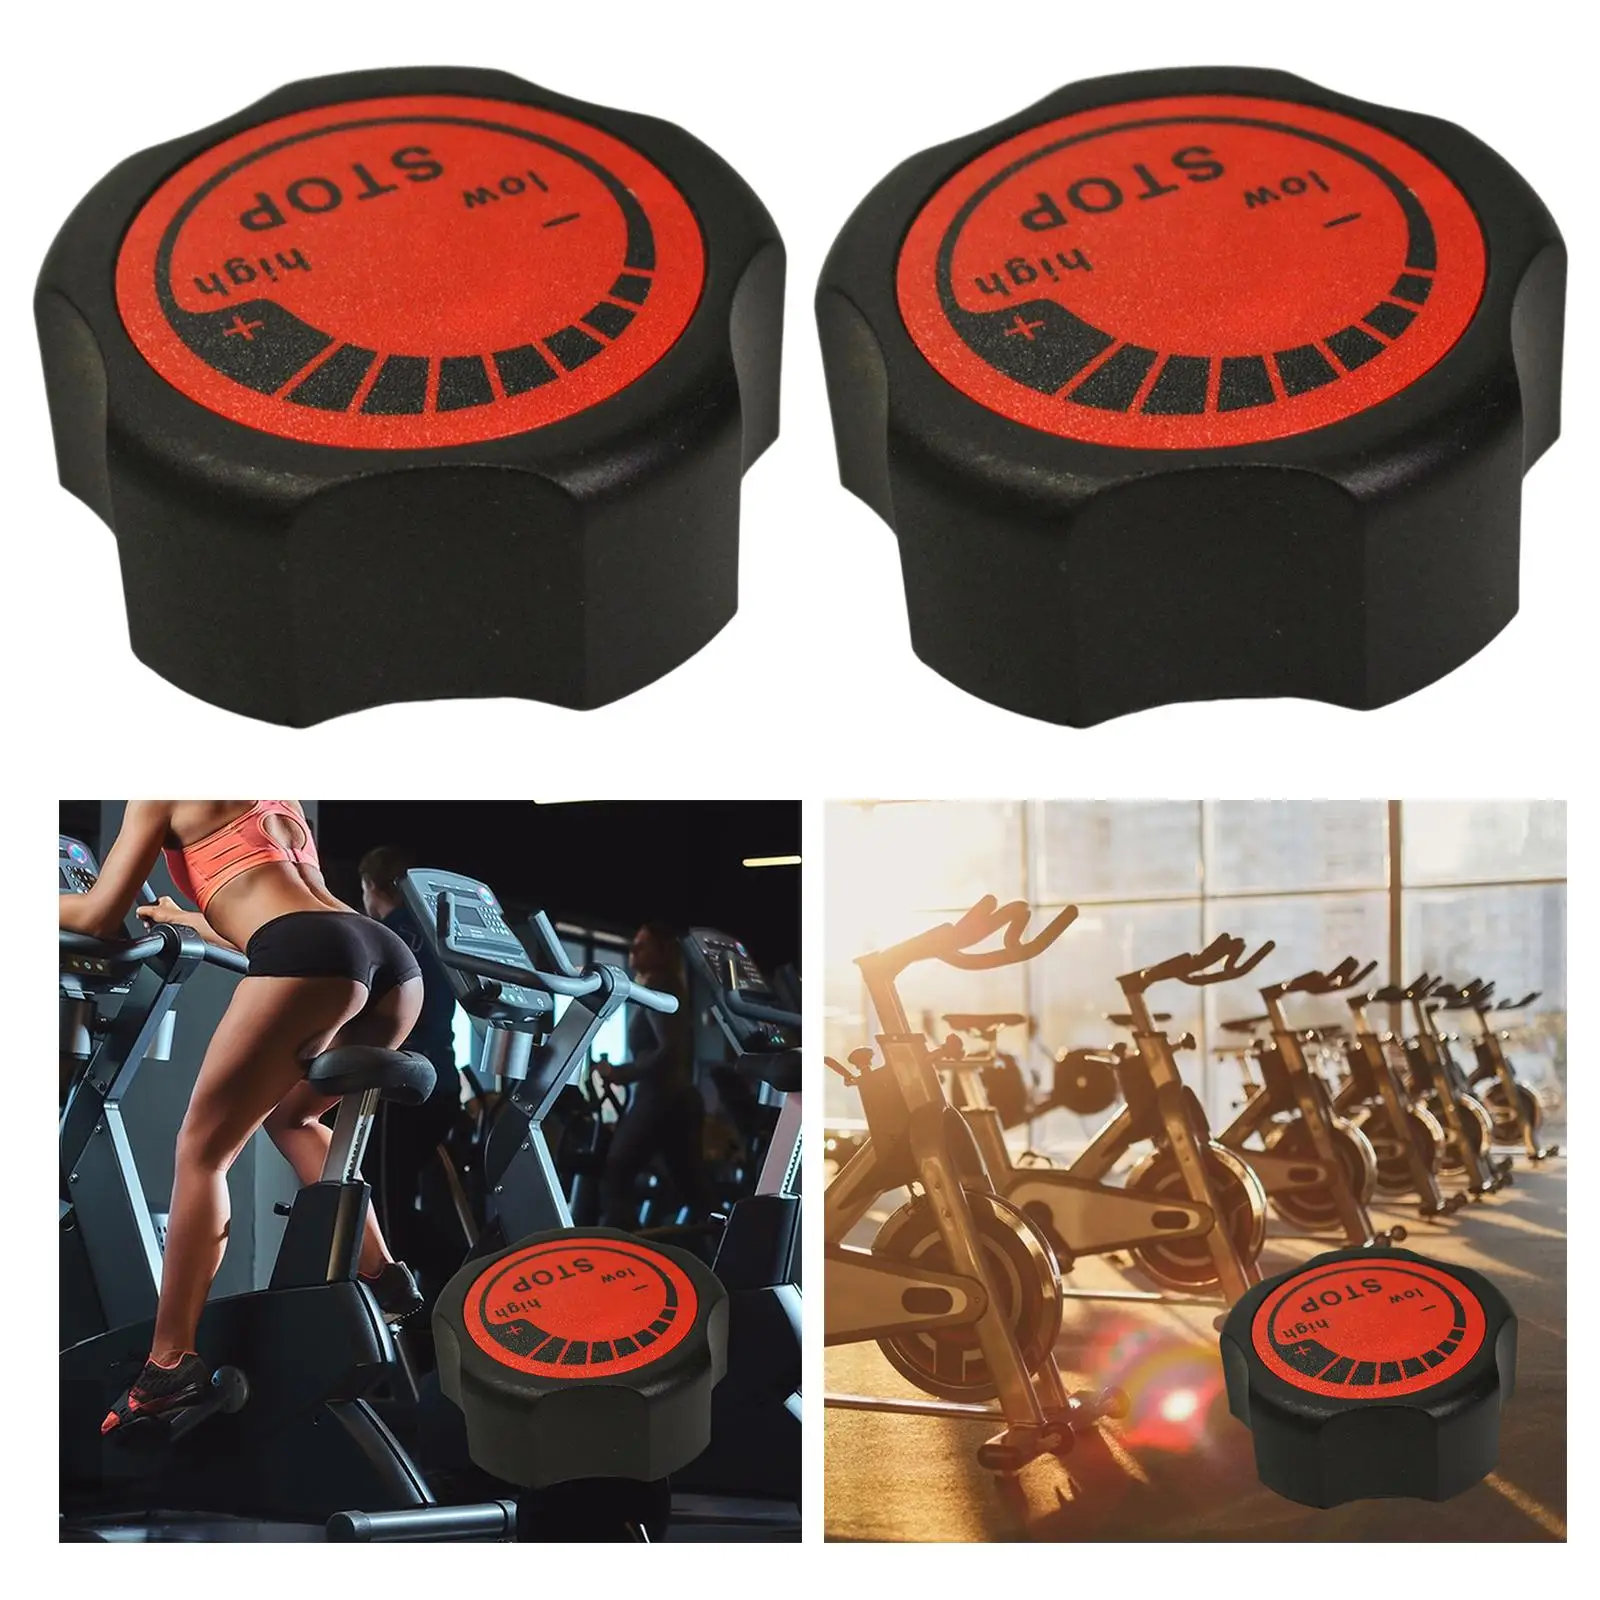 Exercise Bike Resistance Bar Knob Replacement Accs Spare Parts Indoor Cycling Bikes Torque Handle for Home Gym Fitness Workout